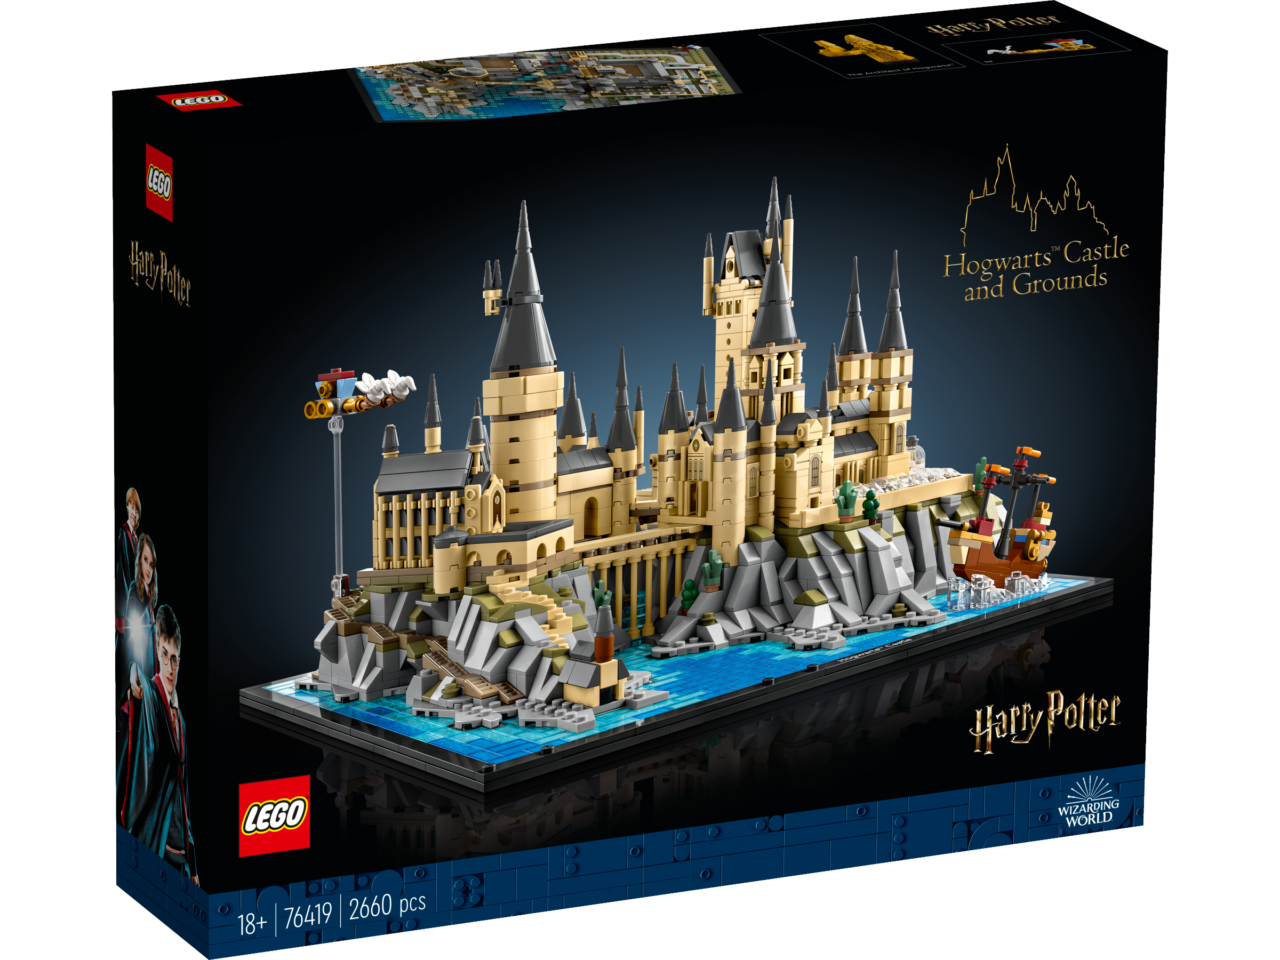 LEGO [New Products] Harry Potter Hogwarts Castle - The Complete Story (76419)